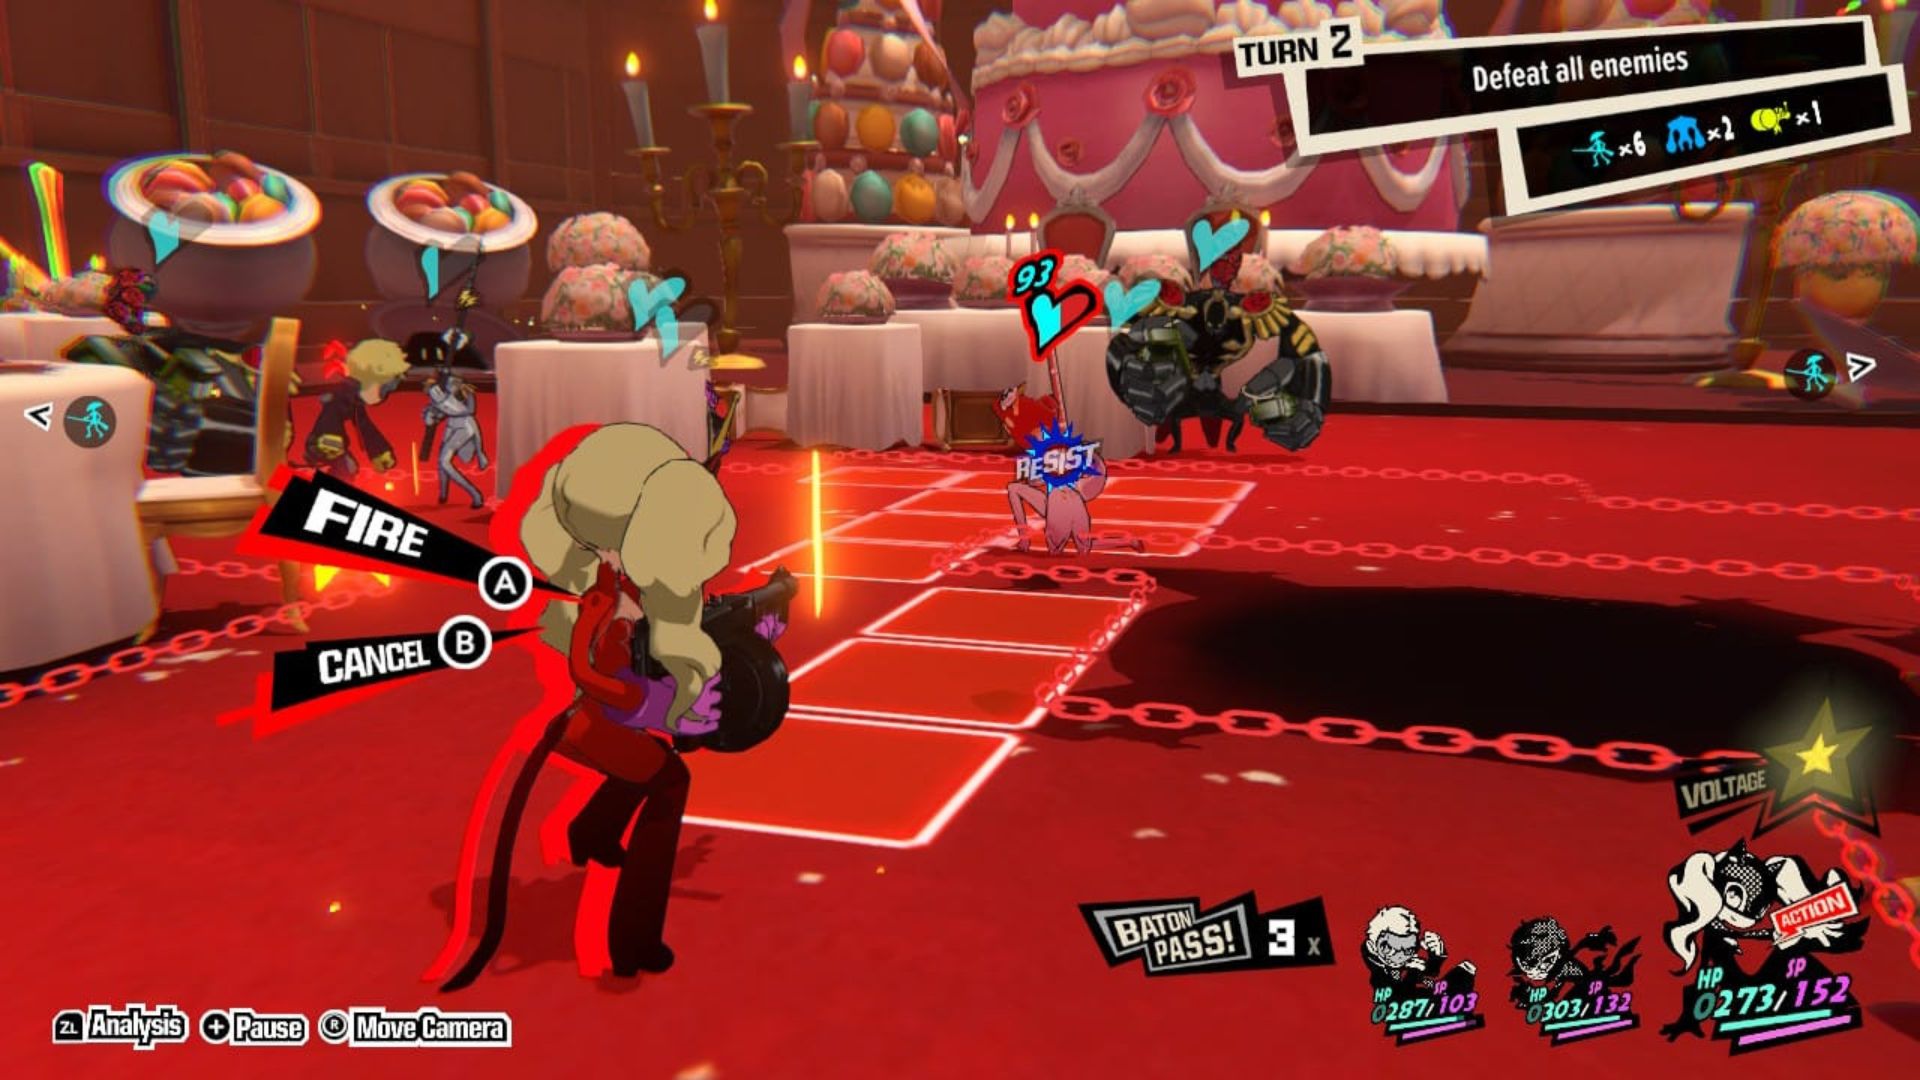 Persona 5 Tactica guide: 5 best party compositions